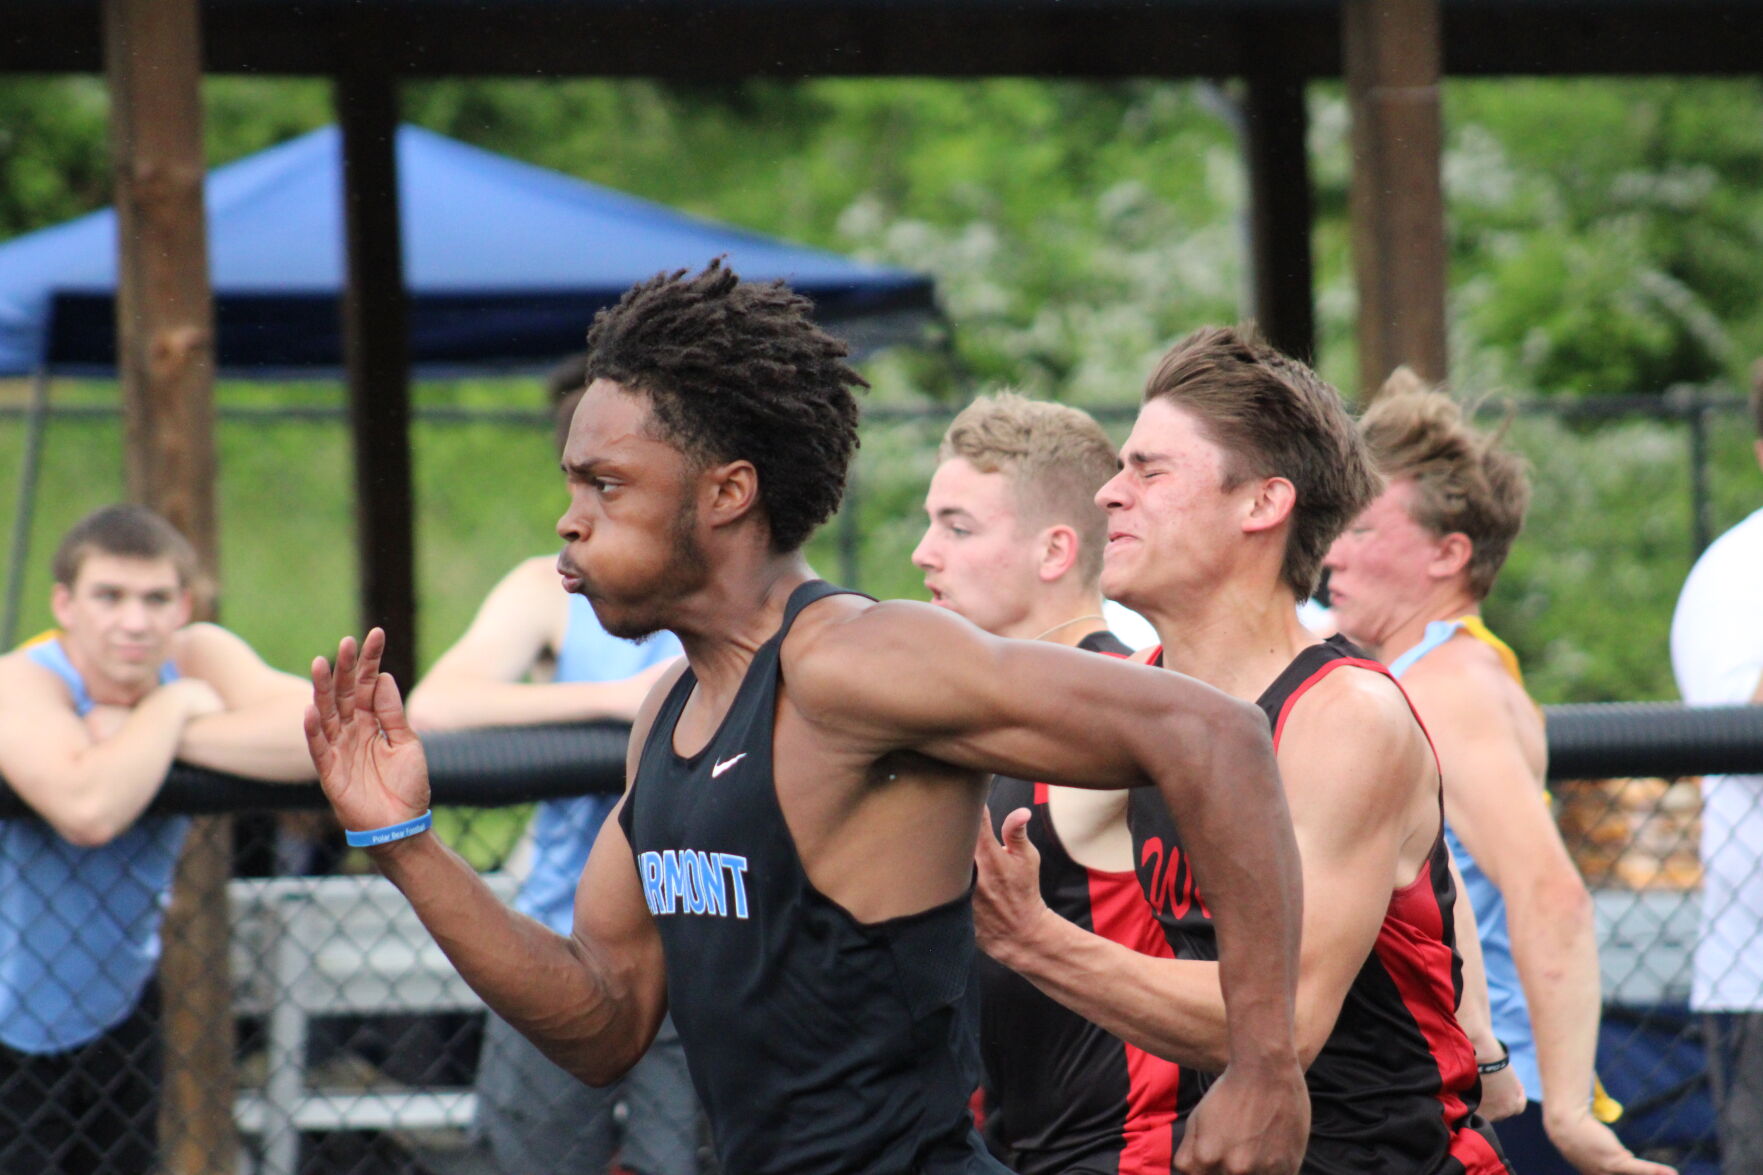 Marion County Track Athletes Secure 30 State Qualifications Amid Rain Delay Drama